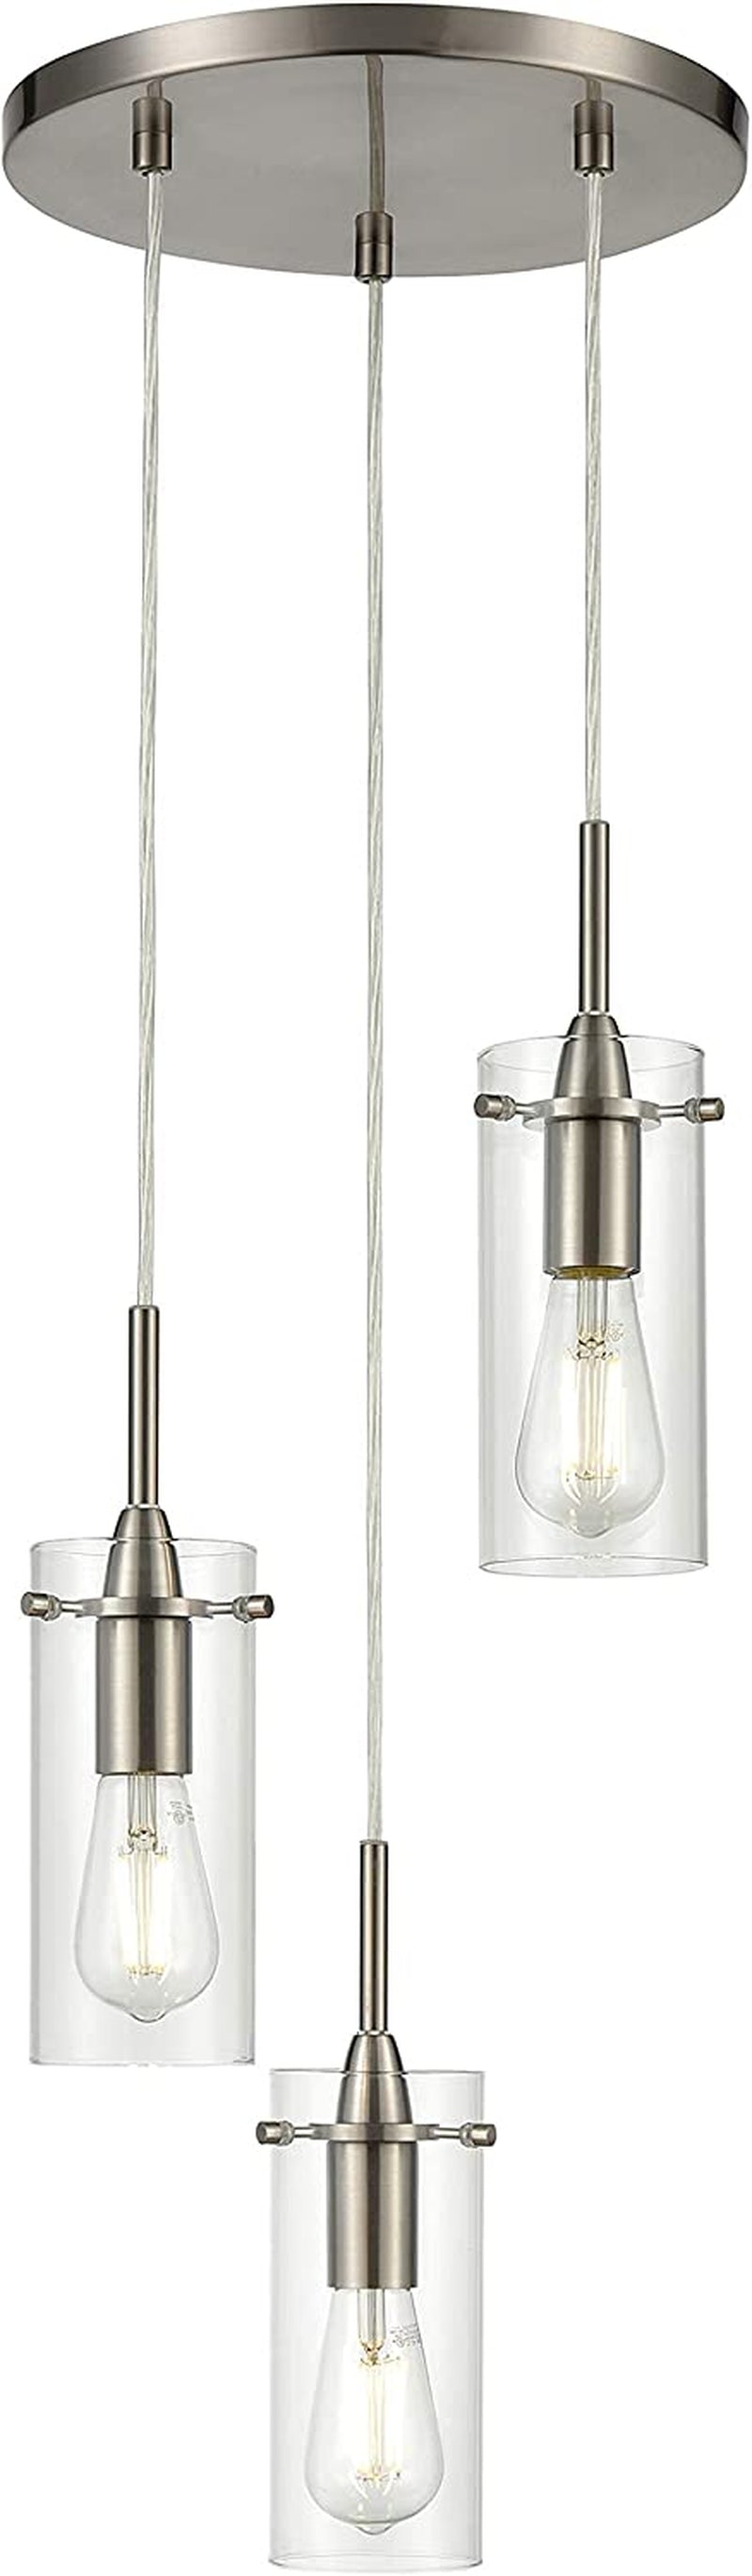 Linea Di Liara Effimero 3-Light Cluster Pendant Lights Stairwell Lighting Small Chandelier Brushed Nickel Modern Chandelier Light Fixture Foyer Chandeliers Entryway High Ceiling Staircase Lights Home & Garden > Lighting > Lighting Fixtures Linea di Liara   